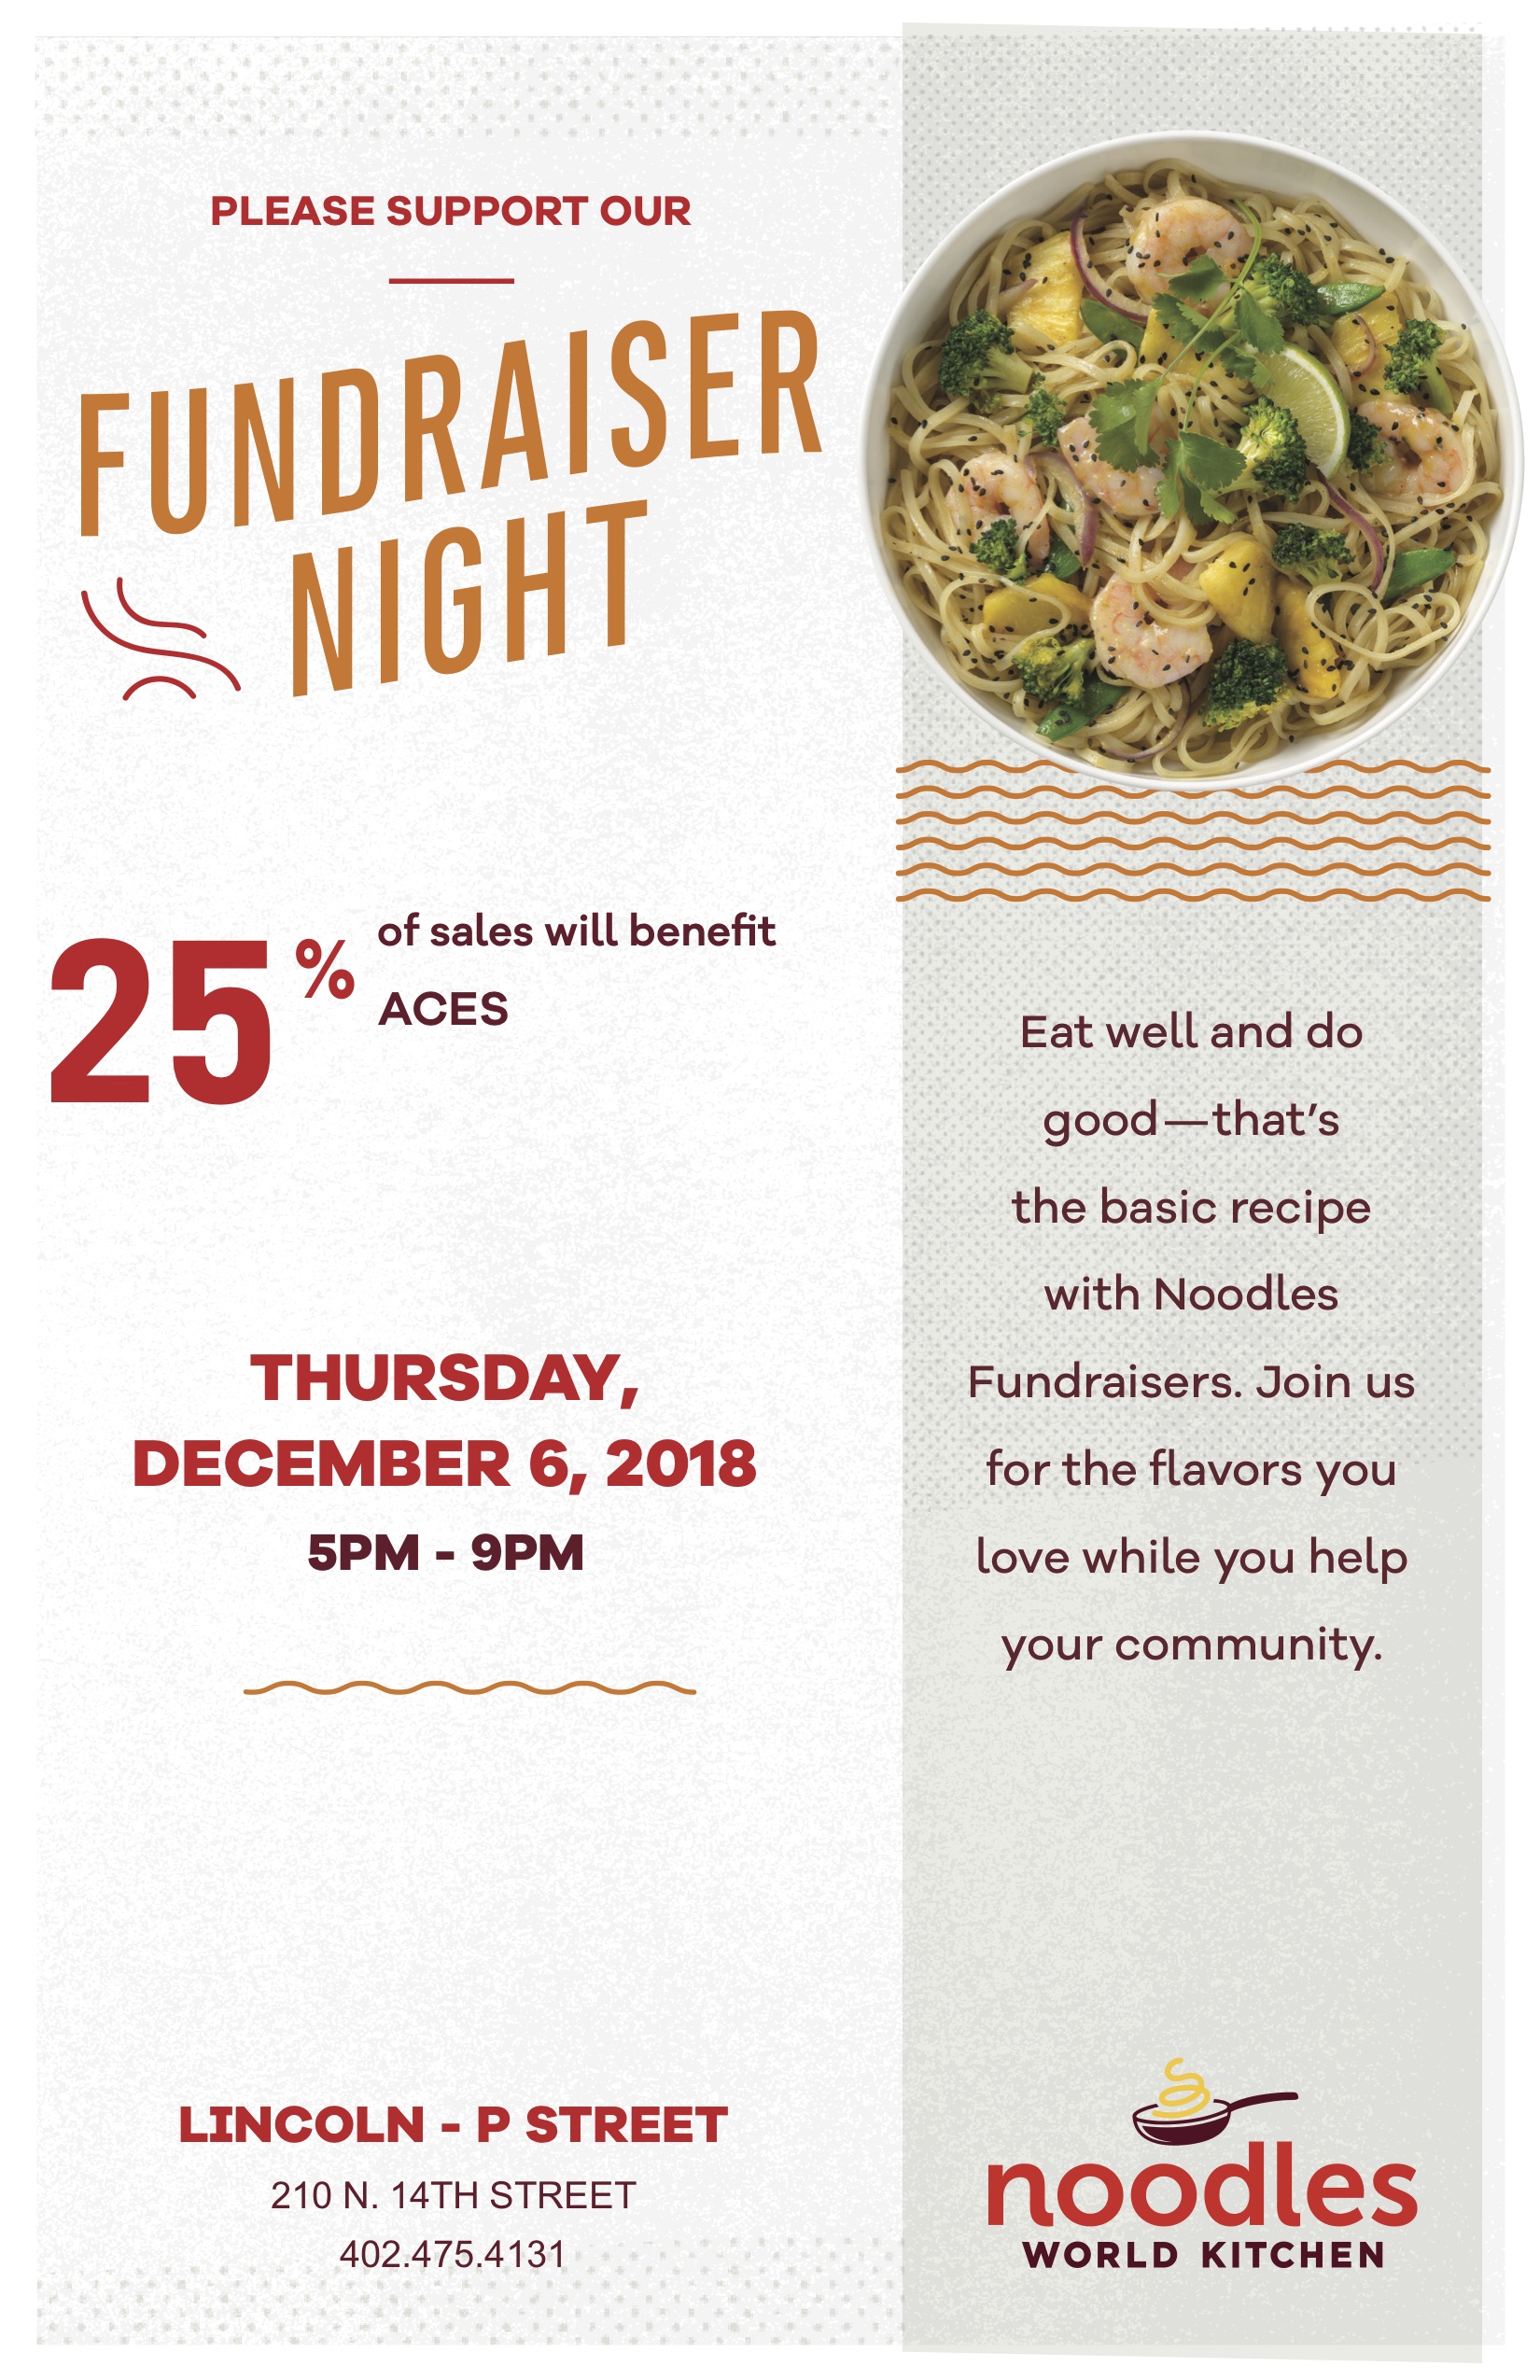 Twenty-five percent of all sales from 5-9 p.m. on Thursday, Dec. 6 will benefit ACES.